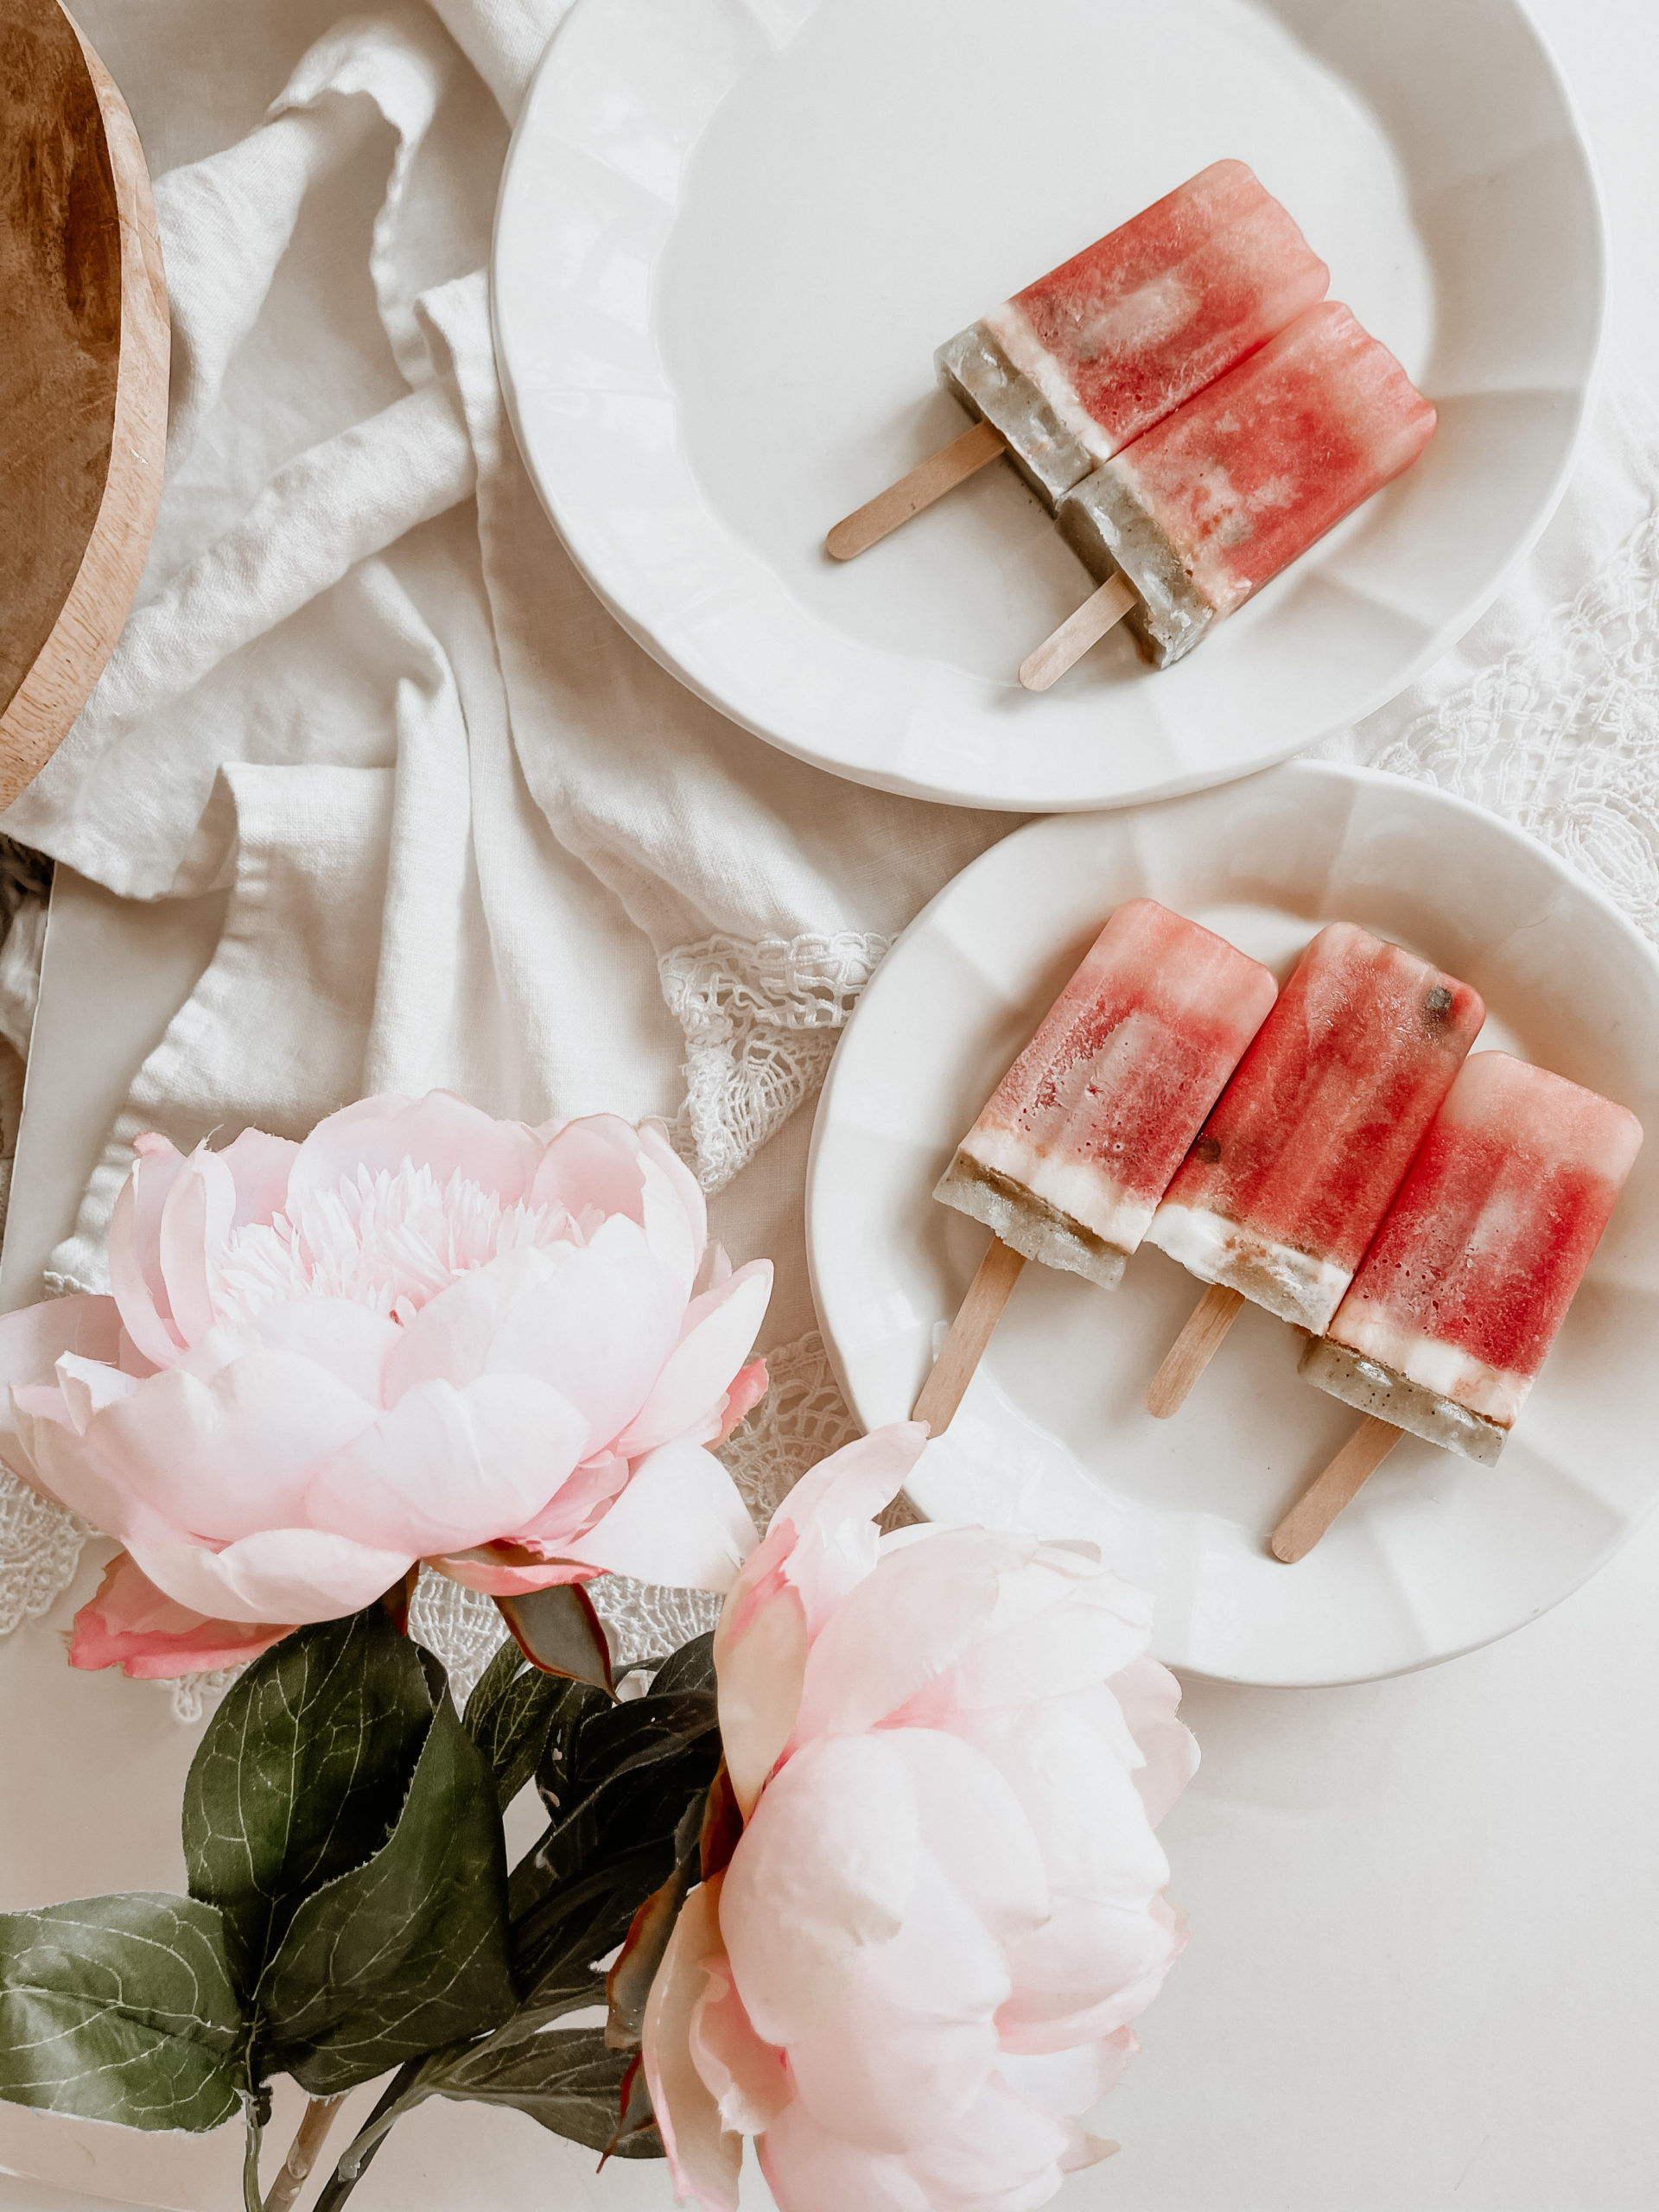 watermelon popsicles photography